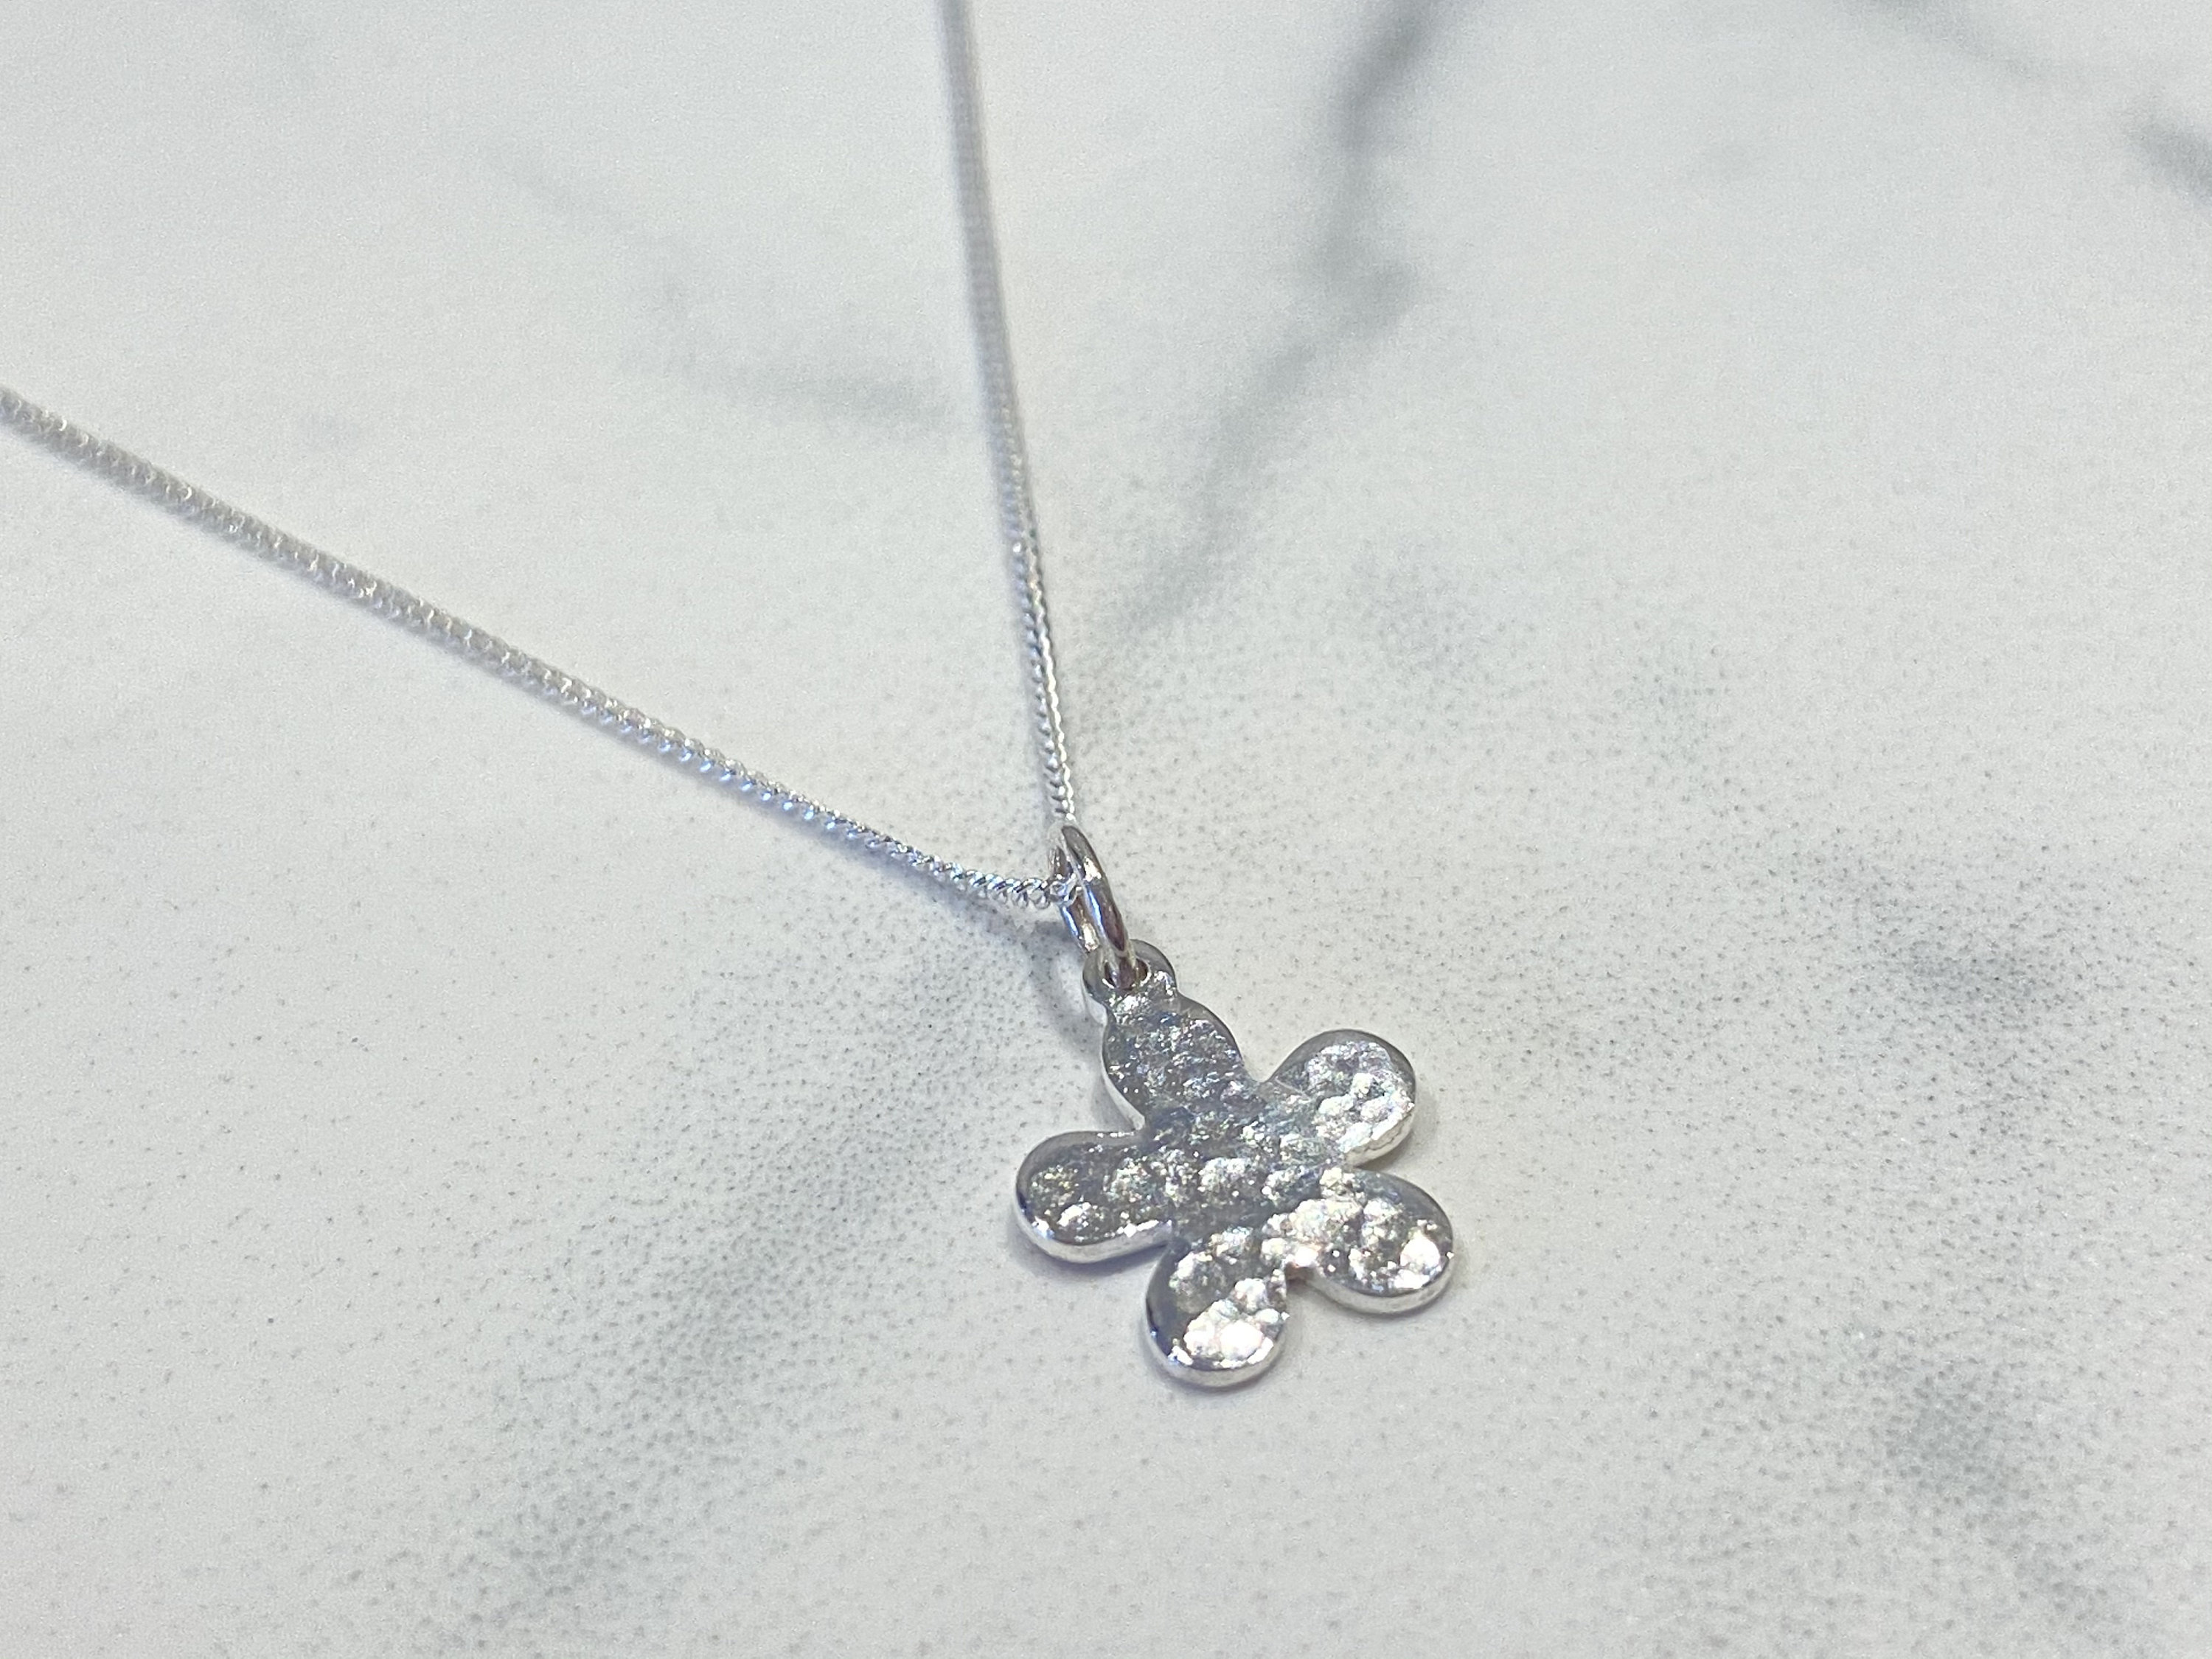 Heart Lock Pendant Necklace, Sterling Silver, Handcrafted, Designed in Cornwall UK